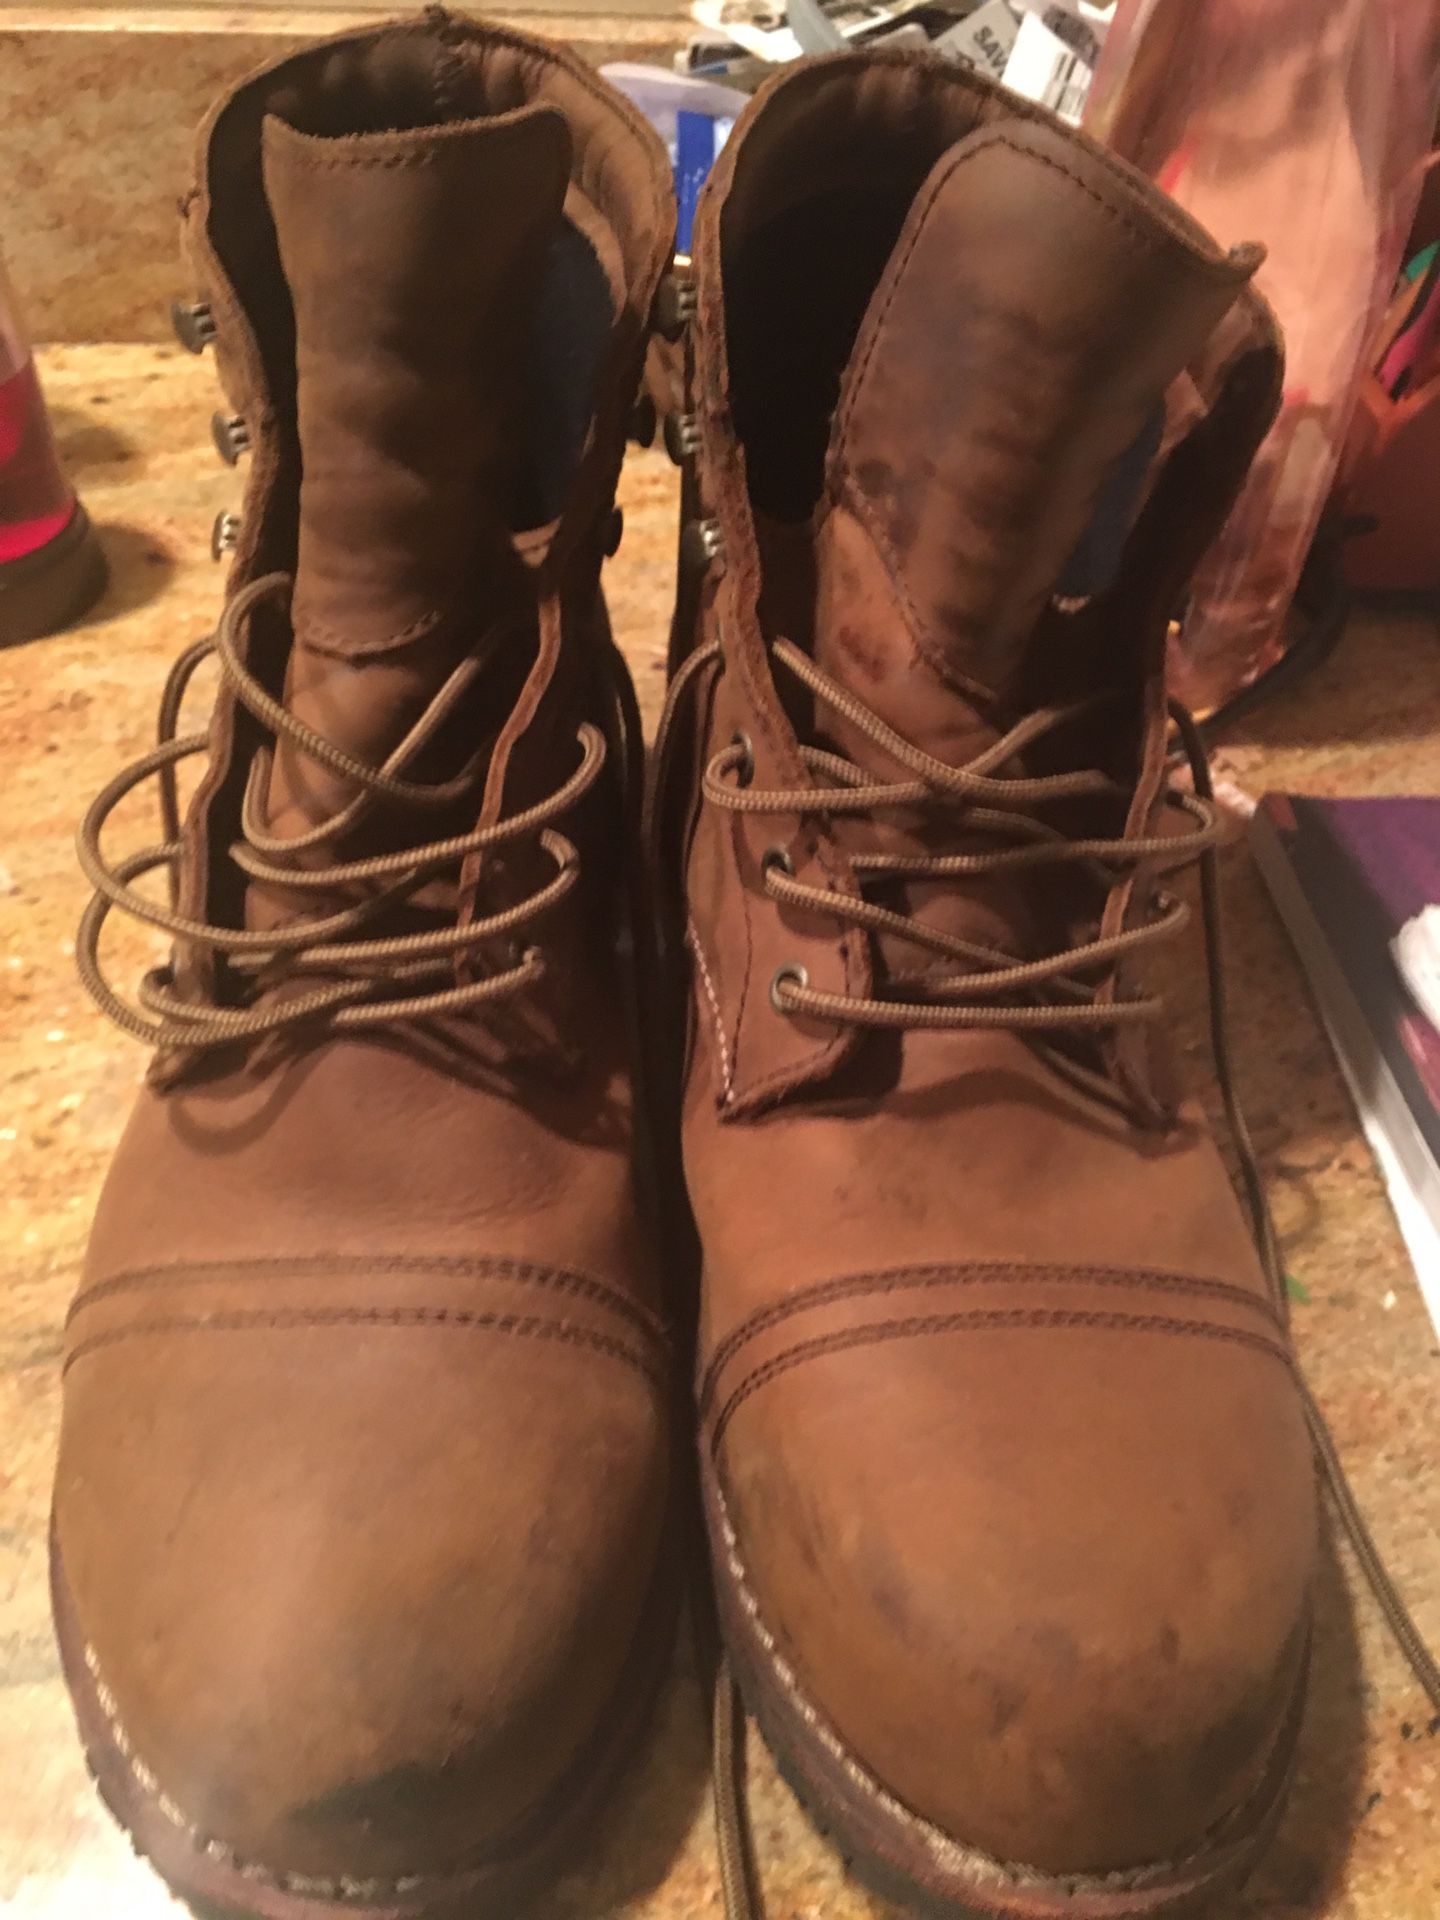 Work Boots Size 13, Leather Uppers, Slip & Oil resistant, Steel Toes, LIKE NEW, Shoes For Crews!